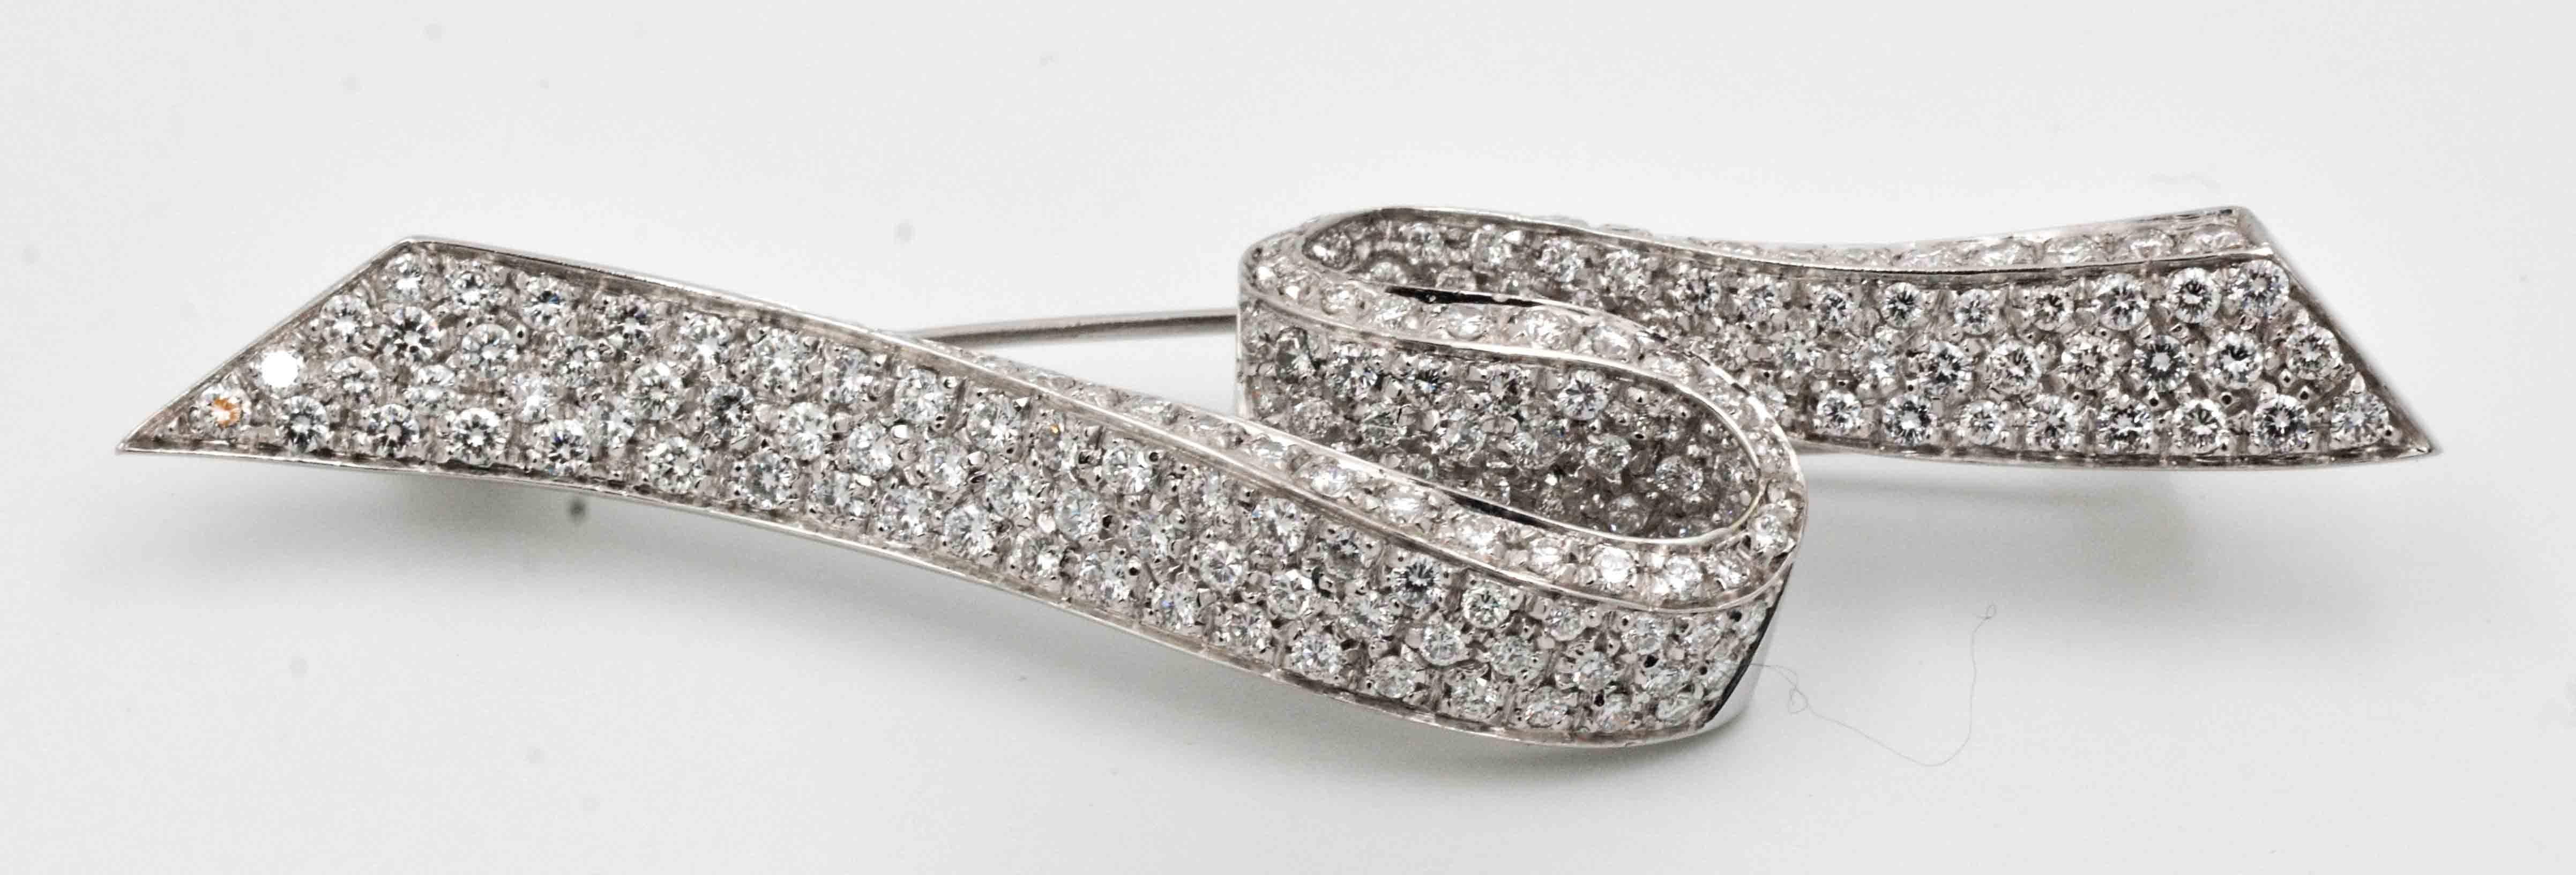 A glamorous ribbon pin crafted in platinum and 18kt white gold is pave set with a total of 2.31 carats of round brilliant cut diamonds (G-H color and VS clarity).  This stunning pin is held securely with a double stick pin on the back with an